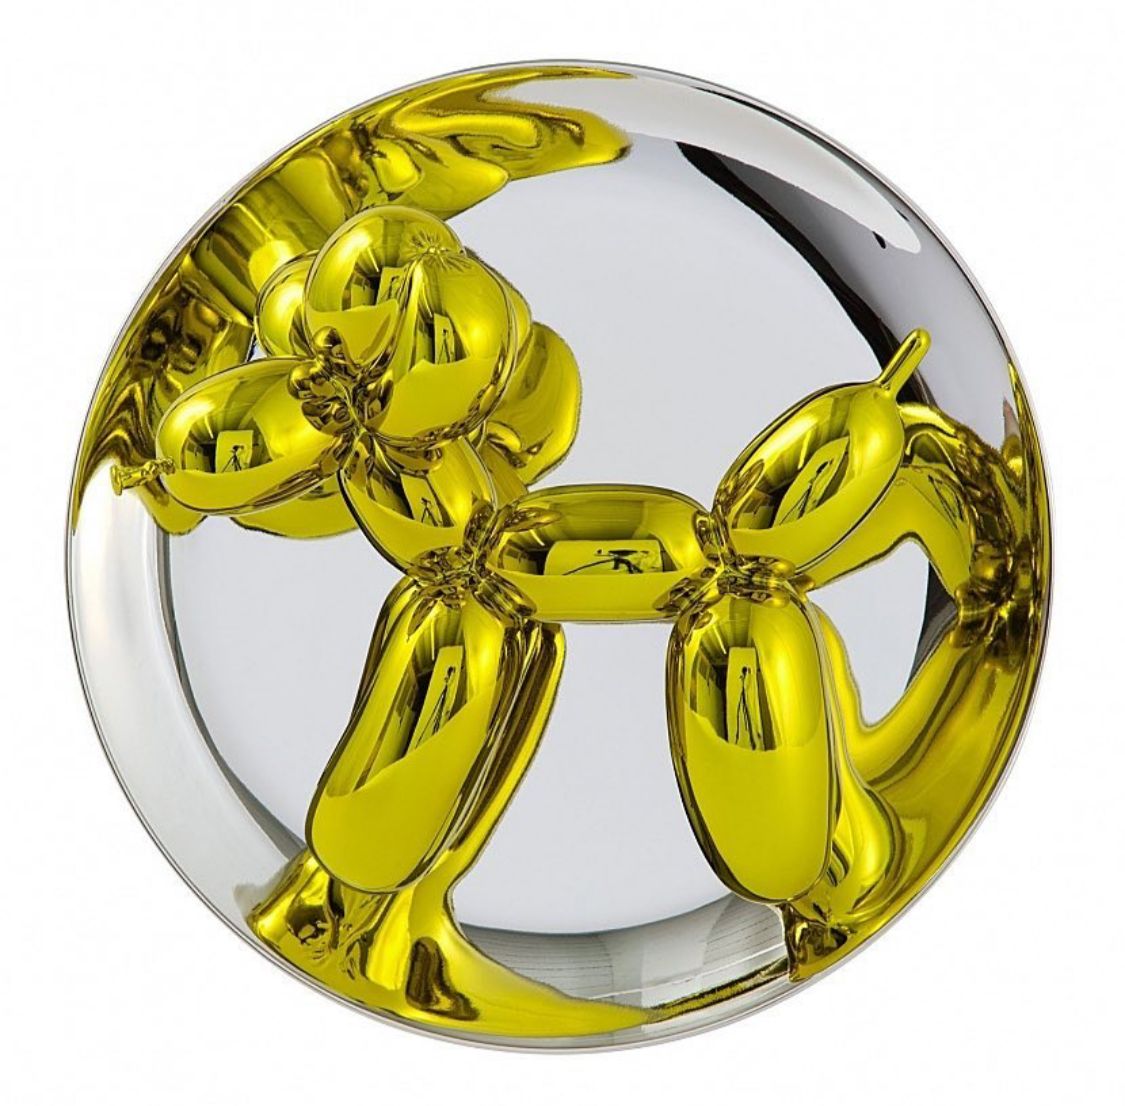 Balloon Dog (Yellow) 2015, Signed / Numbered 1217 Edition Of 2300